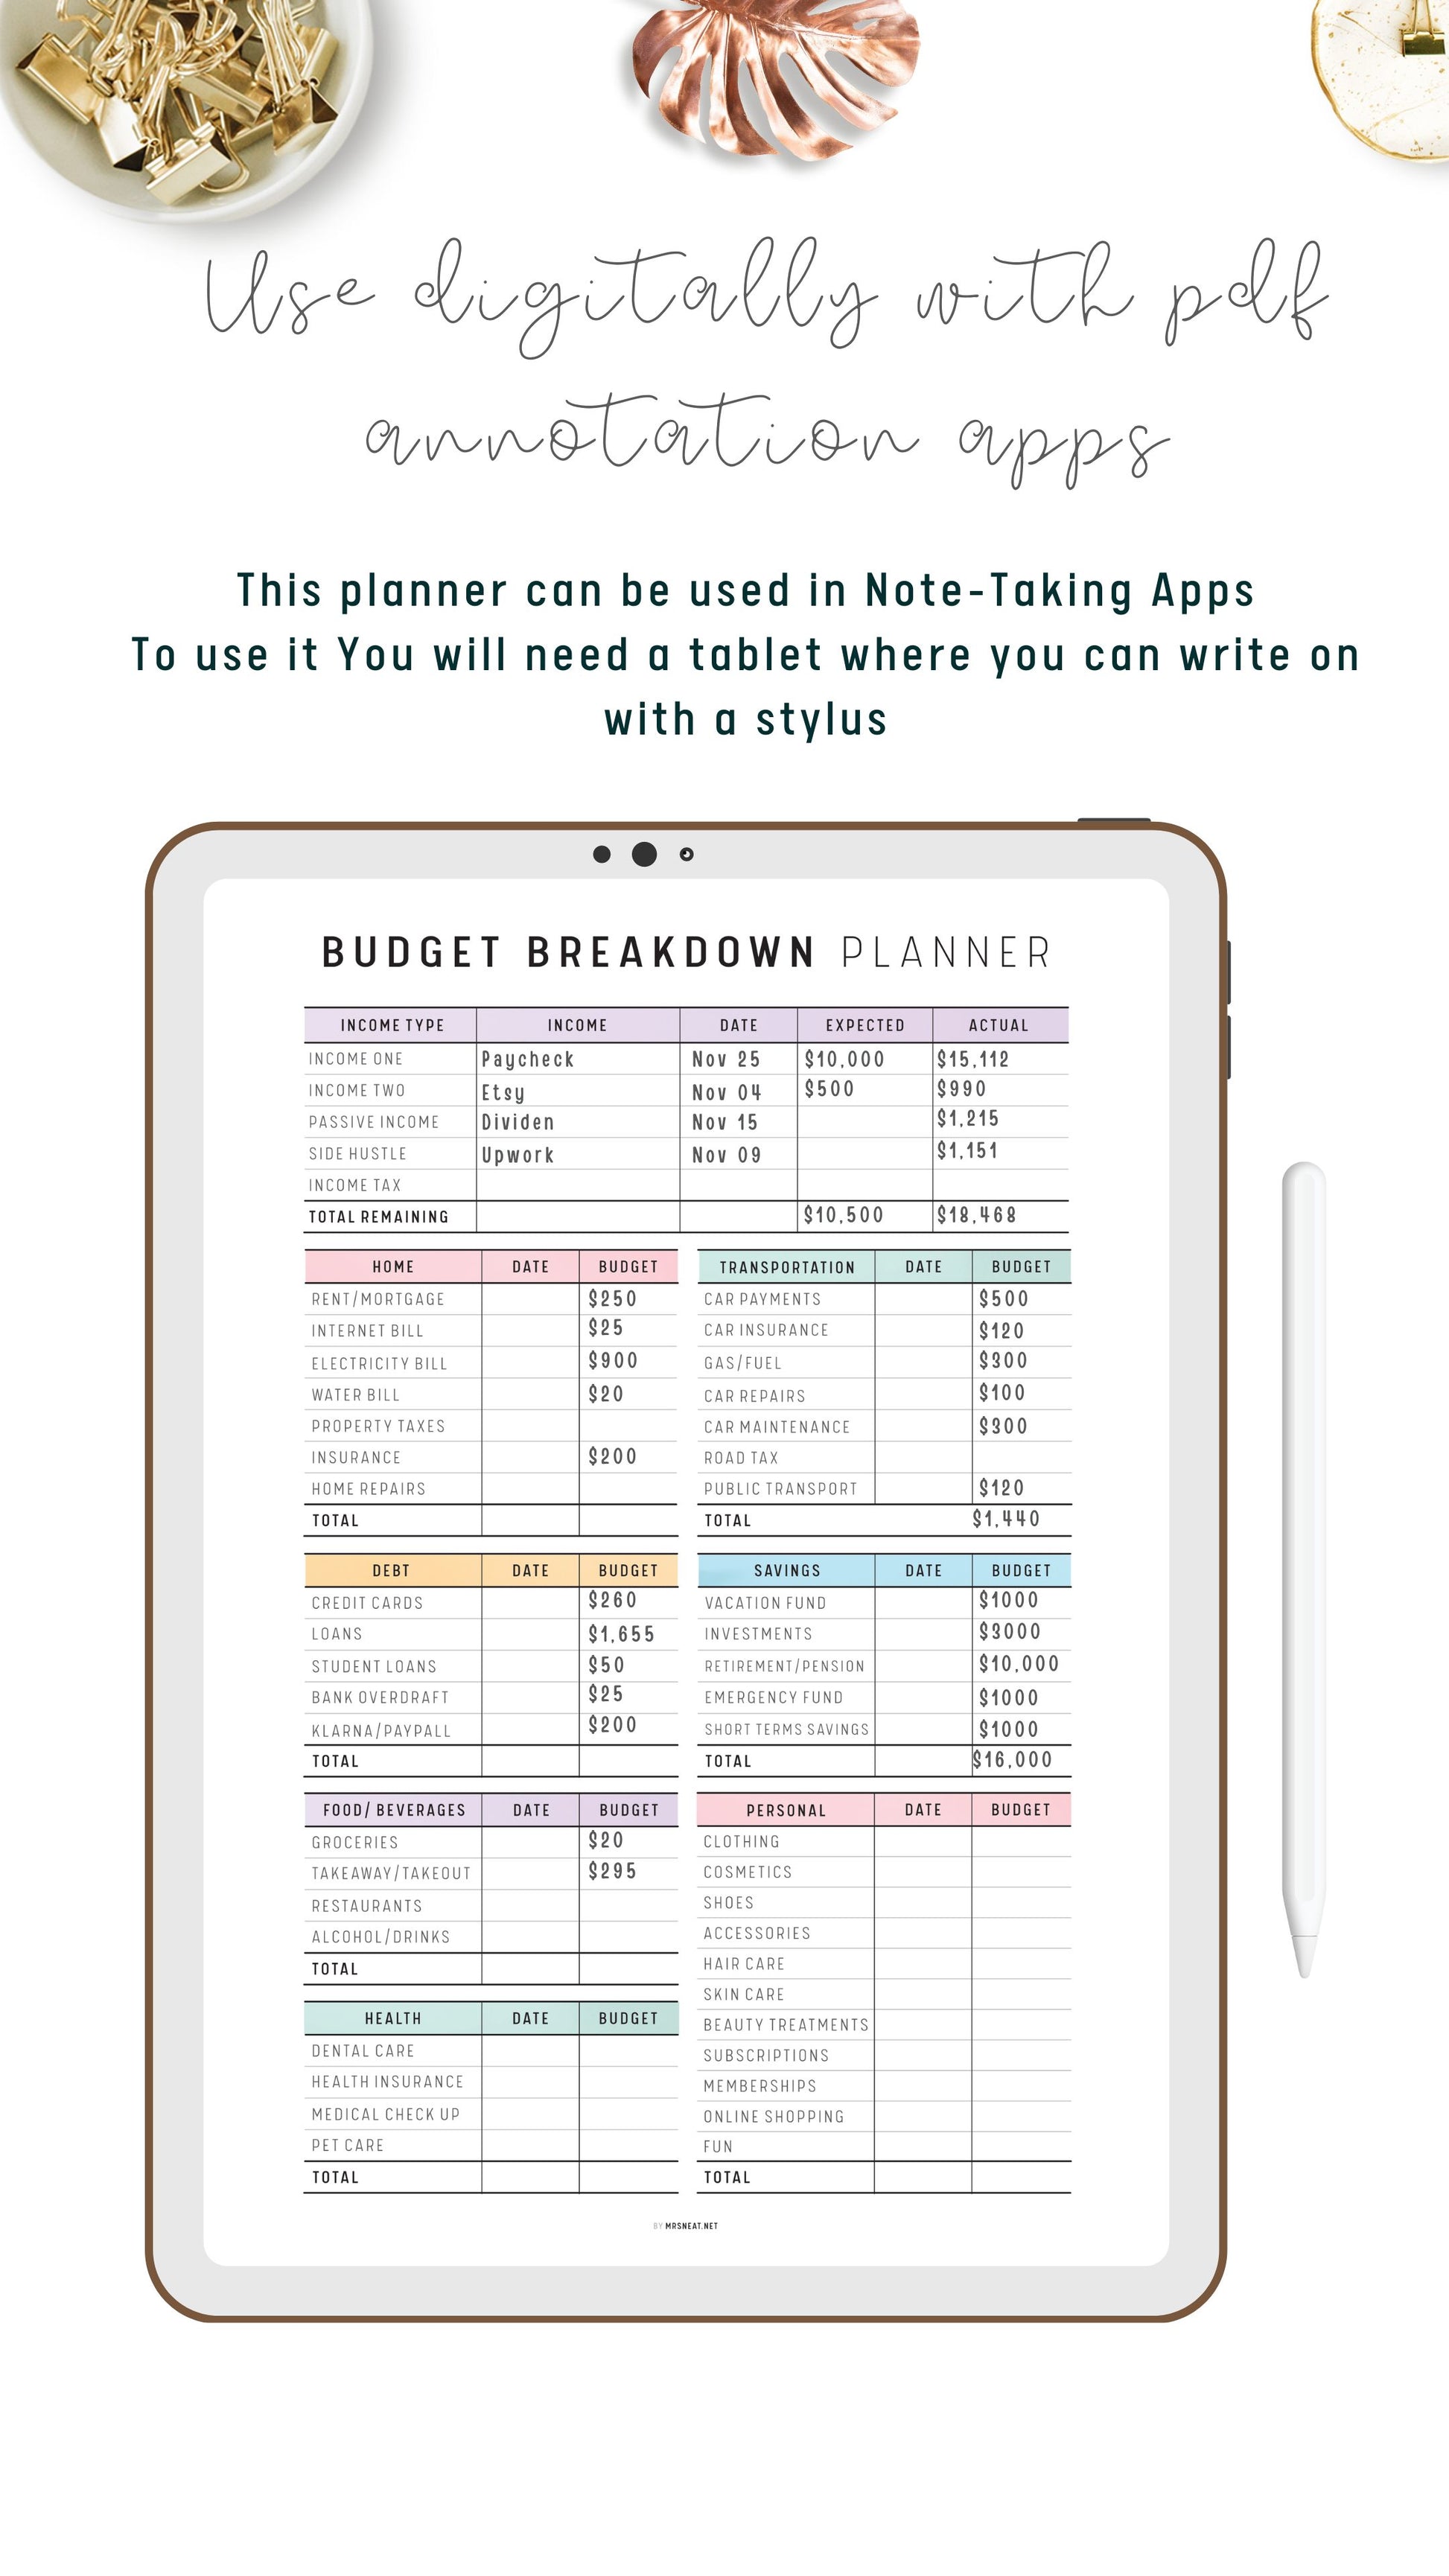 Best Monthly Budget Planner Template Printable, Budget Breakdown Template, Colorful Planner, Minimalist Planner, A4, A5, Letter, Half Letter, PDF